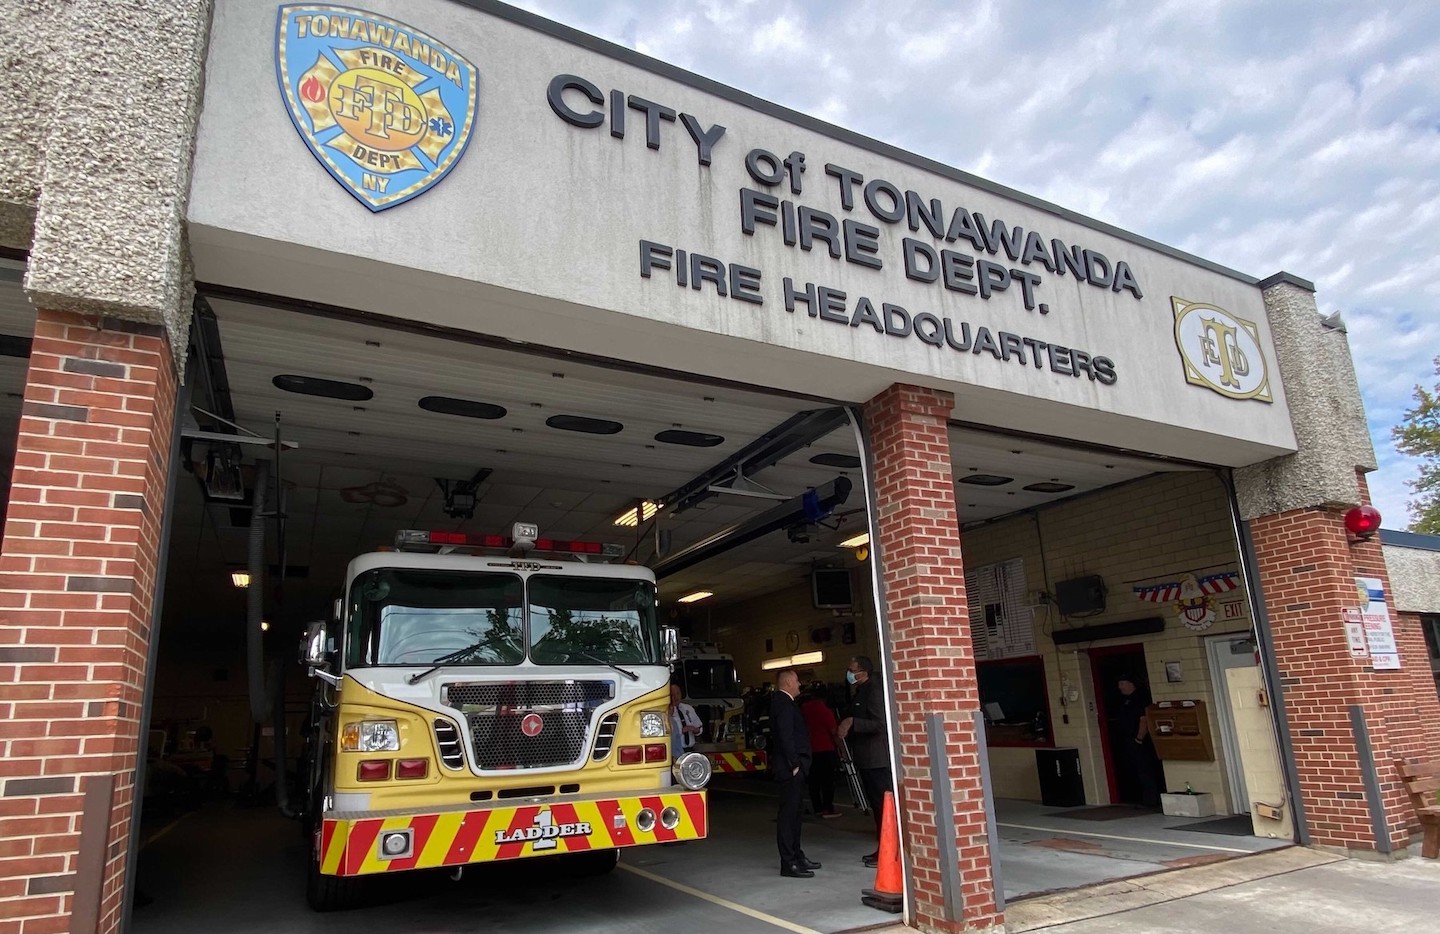 The City of Tonawanda Fire Department (Submitted photo)